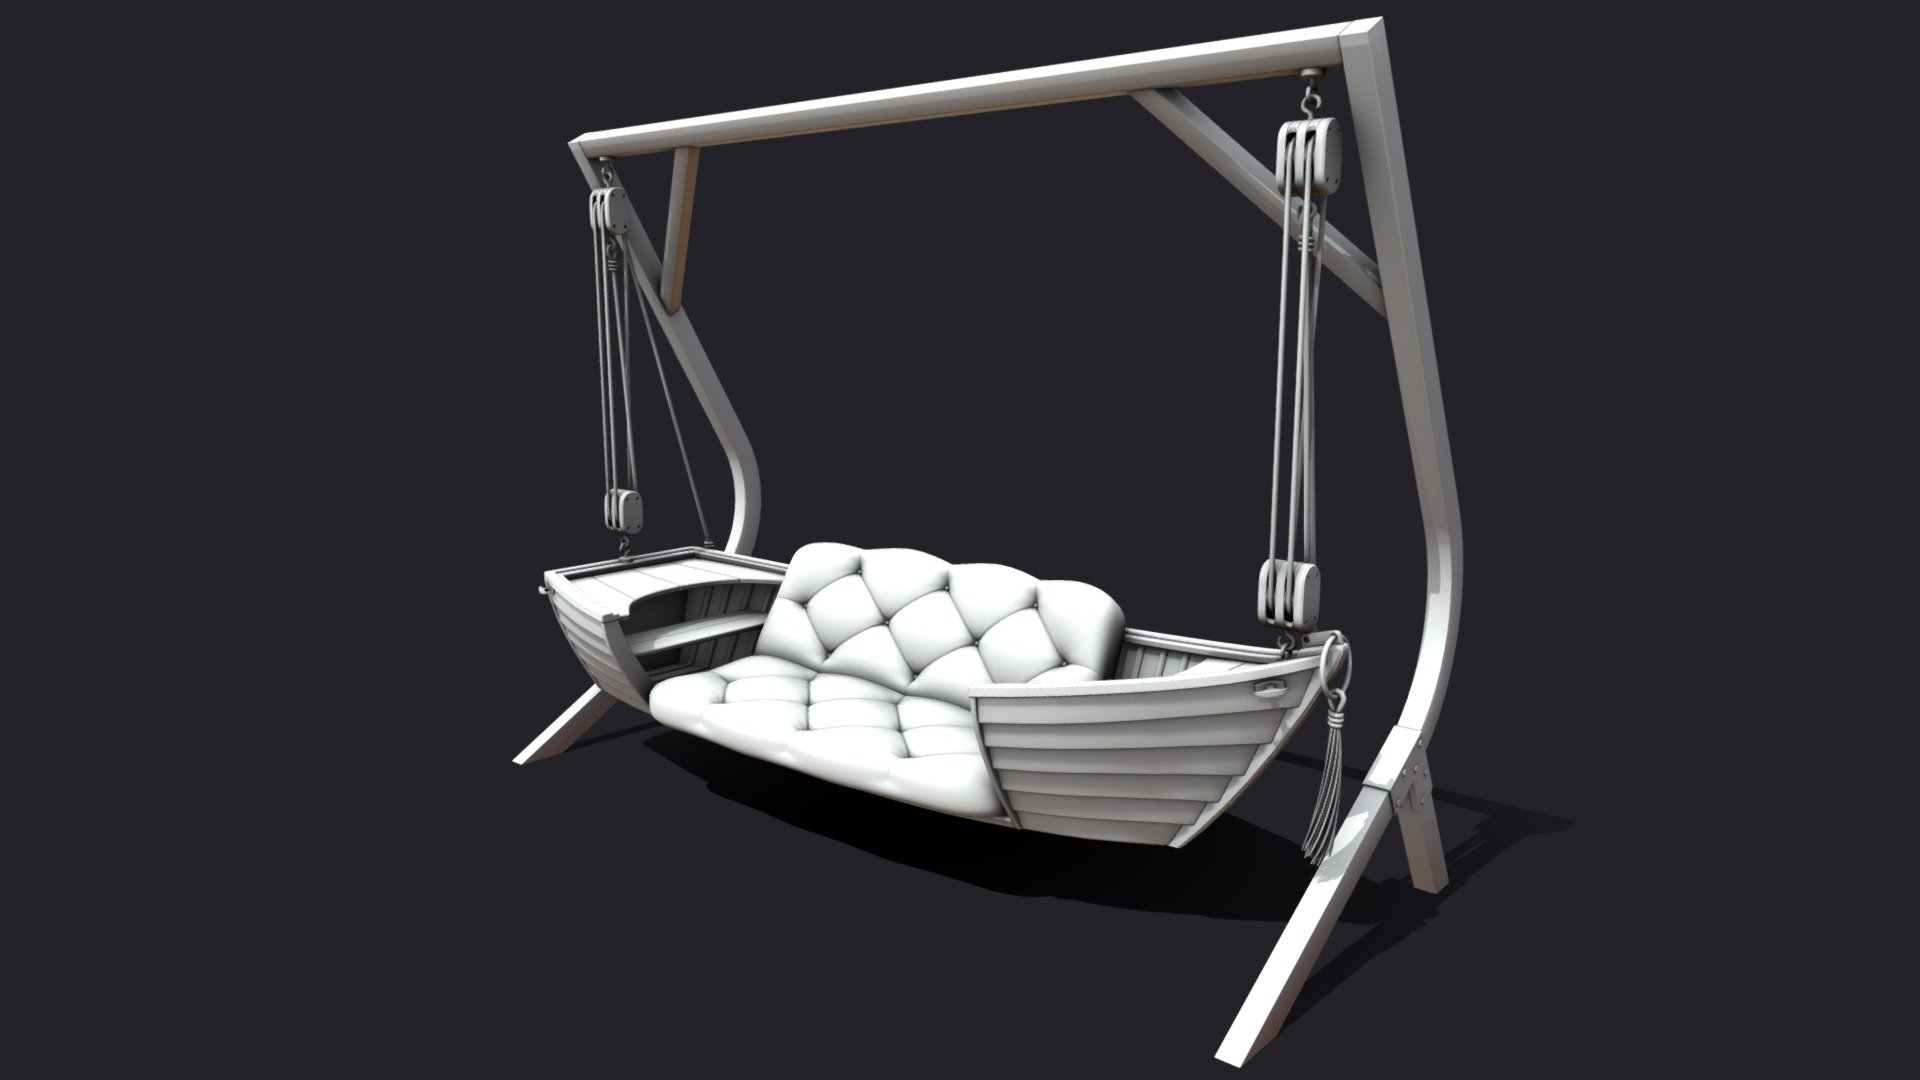 Boat repurposed as a swing. Details include pulley block, rope knots, tassels and seating 3d model